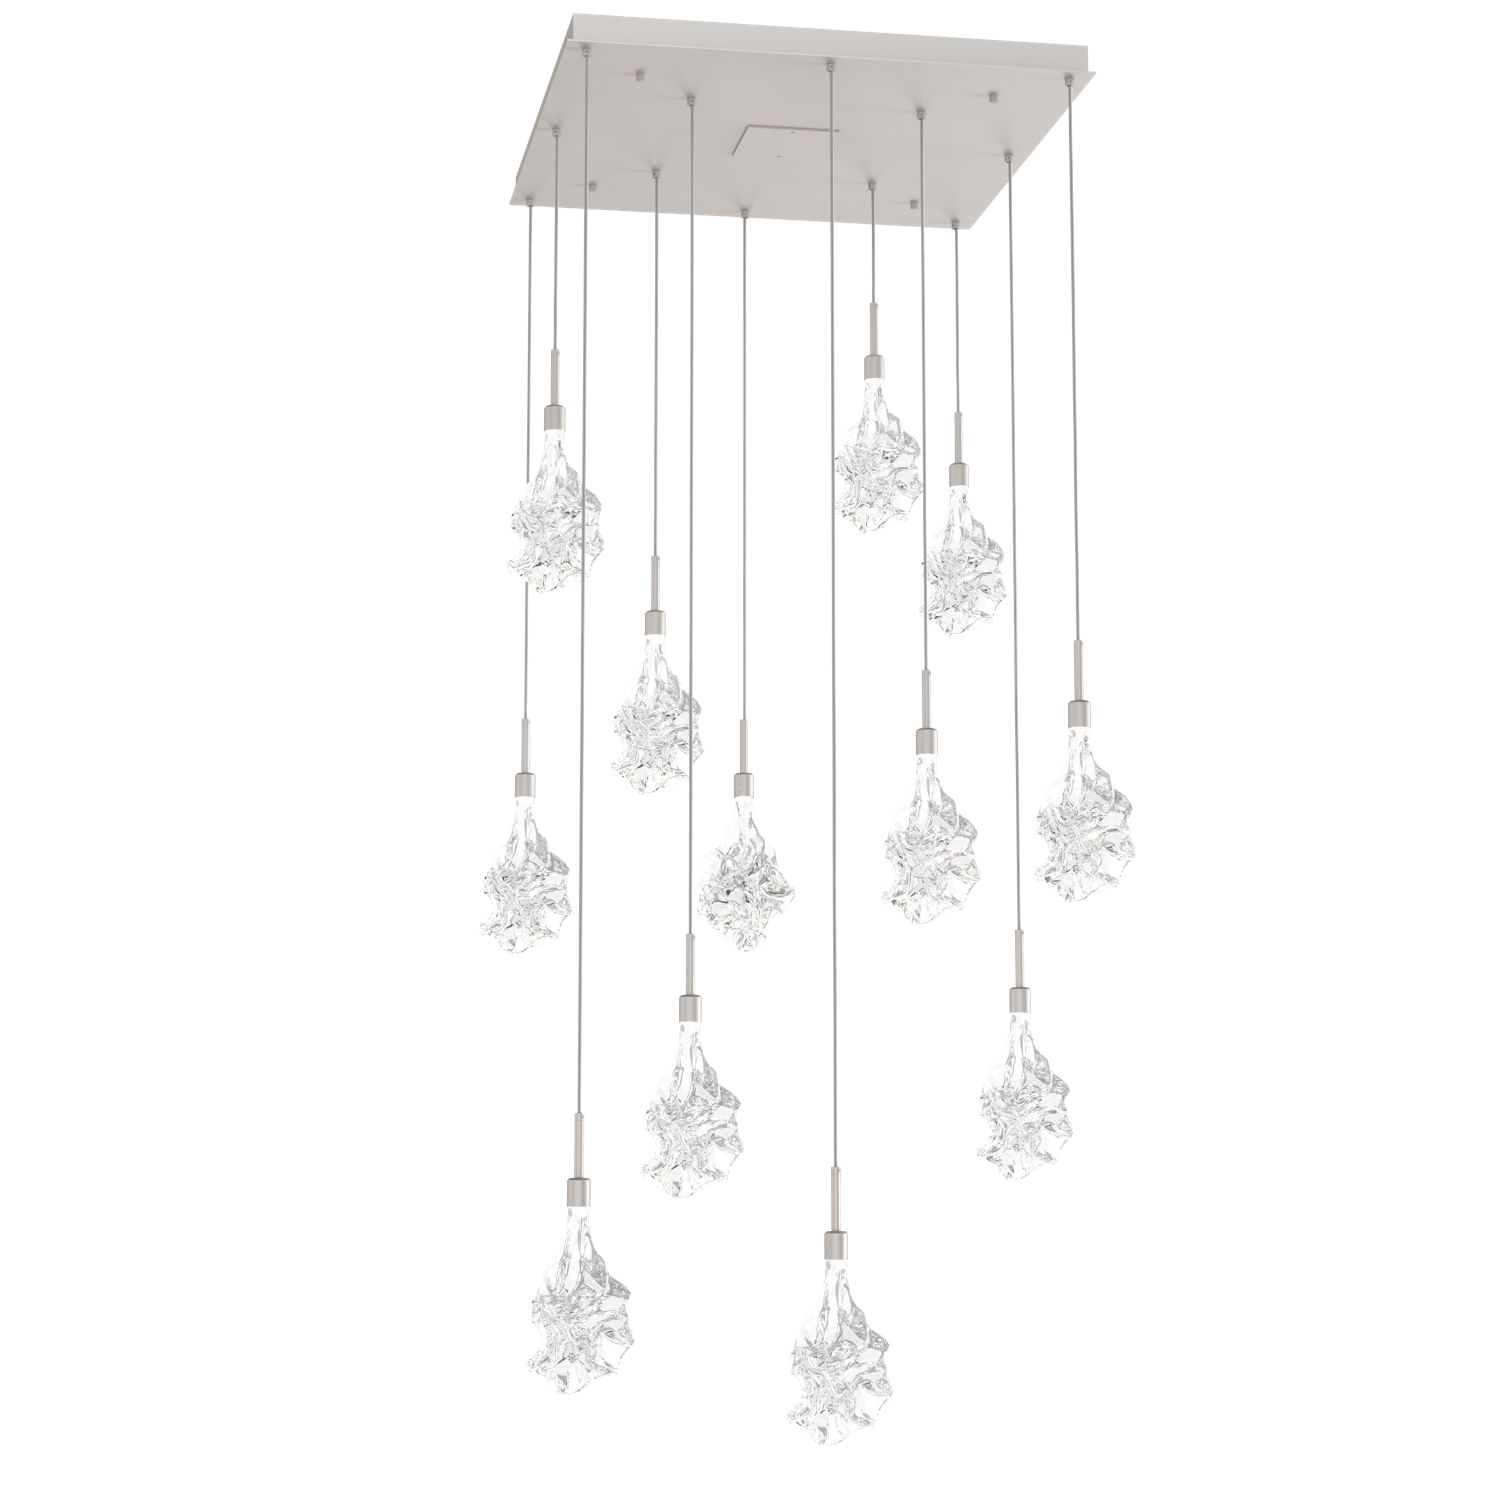 CHB0059-12-BS-Hammerton-Studio-Blossom-12-light-square-pendant-chandelier-with-metallic-beige-silver-finish-and-clear-handblown-crystal-glass-shades-and-LED-lamping